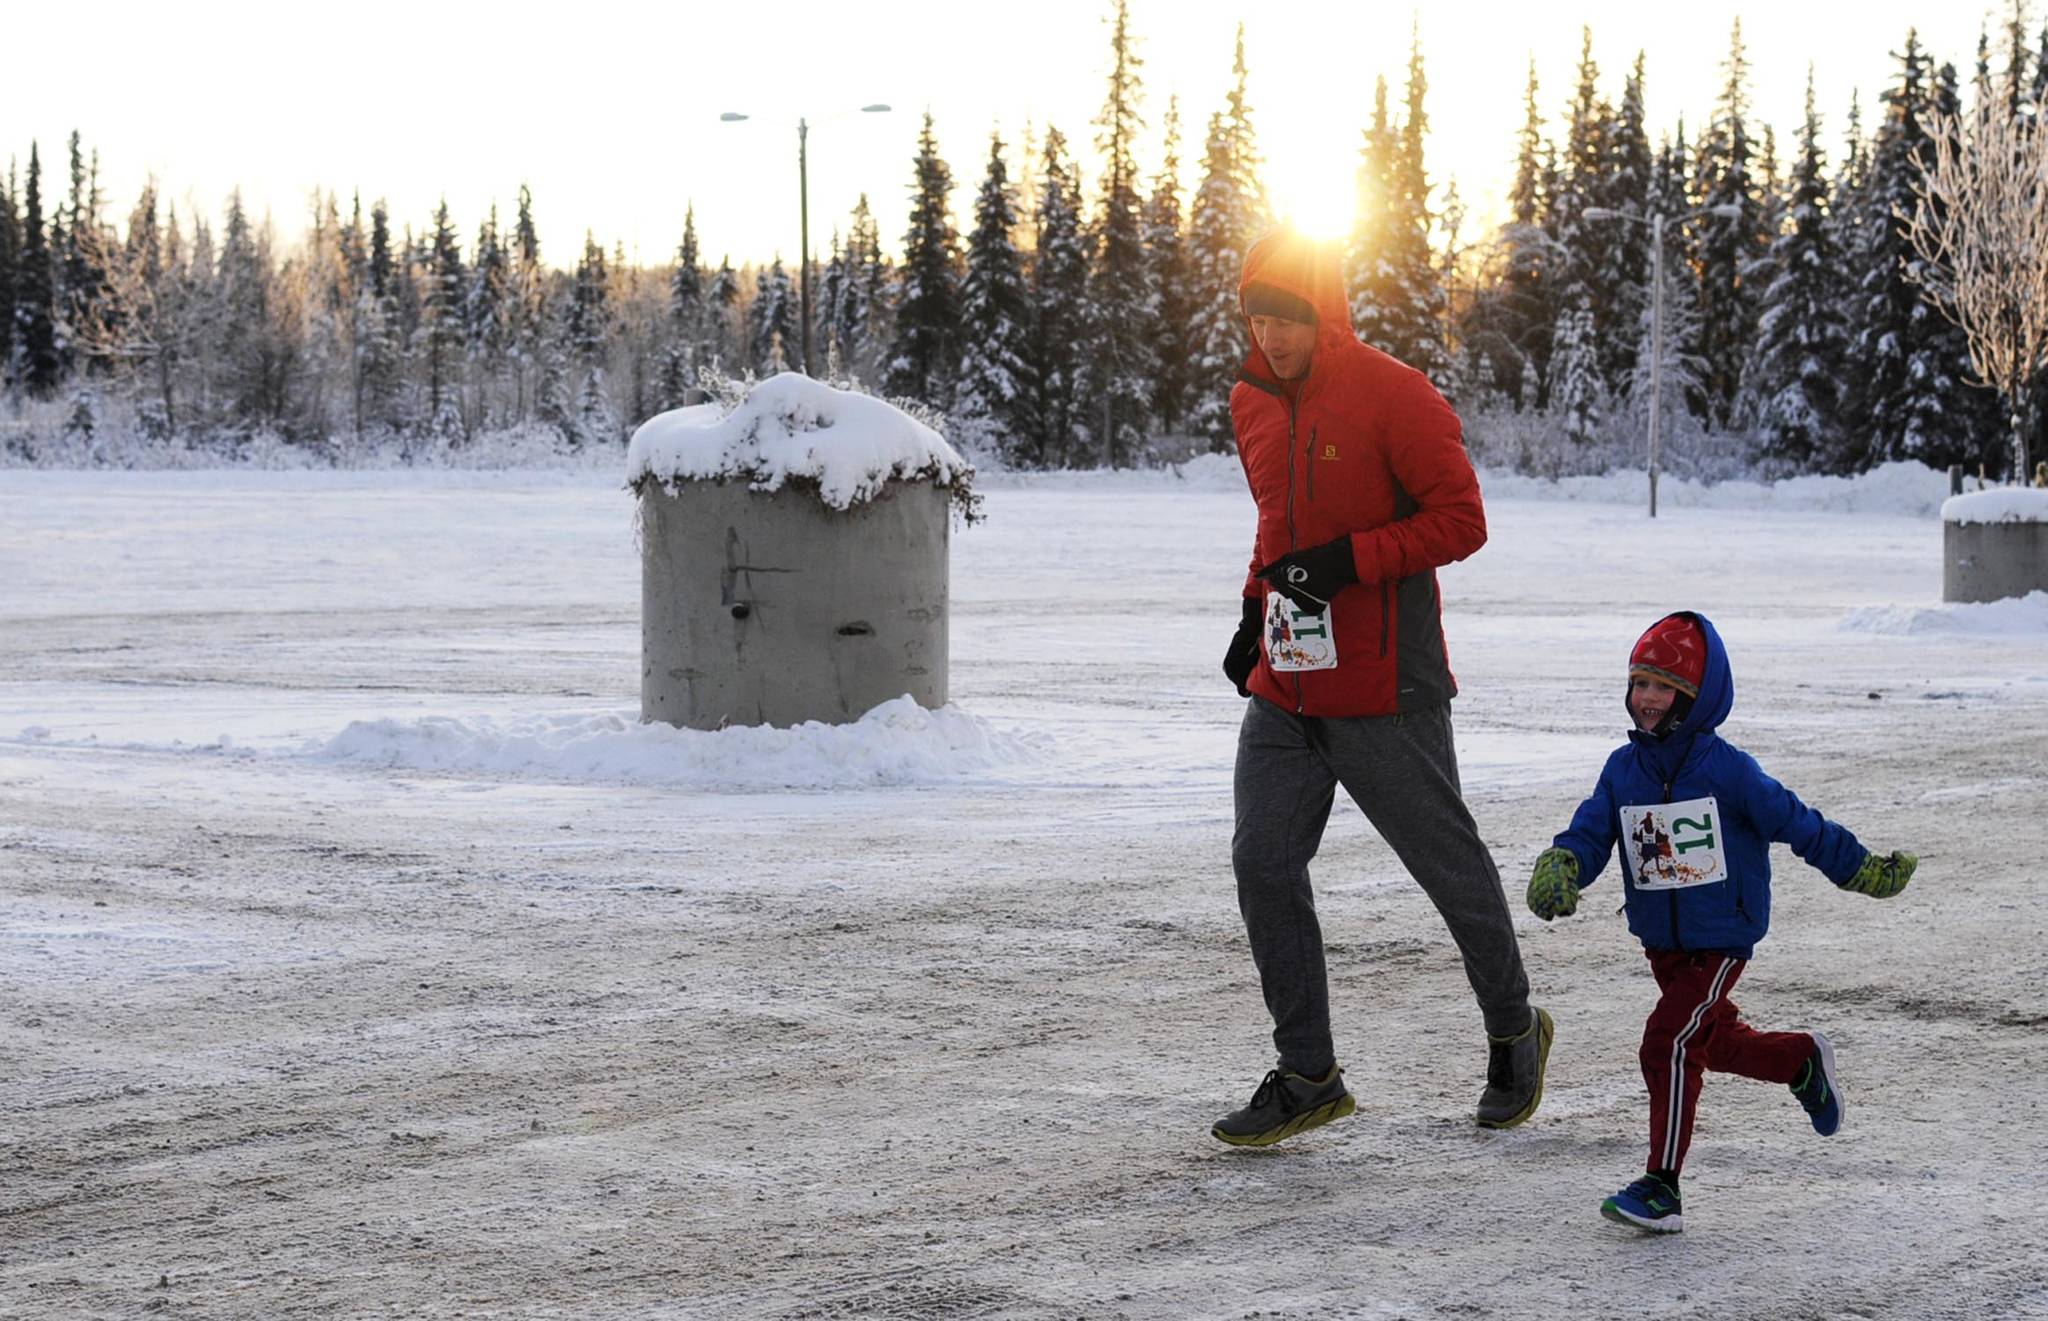 Adam Reimer and his son Gus Reimer, 4, finish the 1-mile Turkey Trot race at the Soldotna Regional Sports Complex on Thursday in Soldotna. The organizers of the event, which also included a 5K race, donated all the proceeds to Freedom House, a Soldotna nonprofit sober living home for women recovering from addiction. (Photo by Elizabeth Earl/Peninsula Clarion)